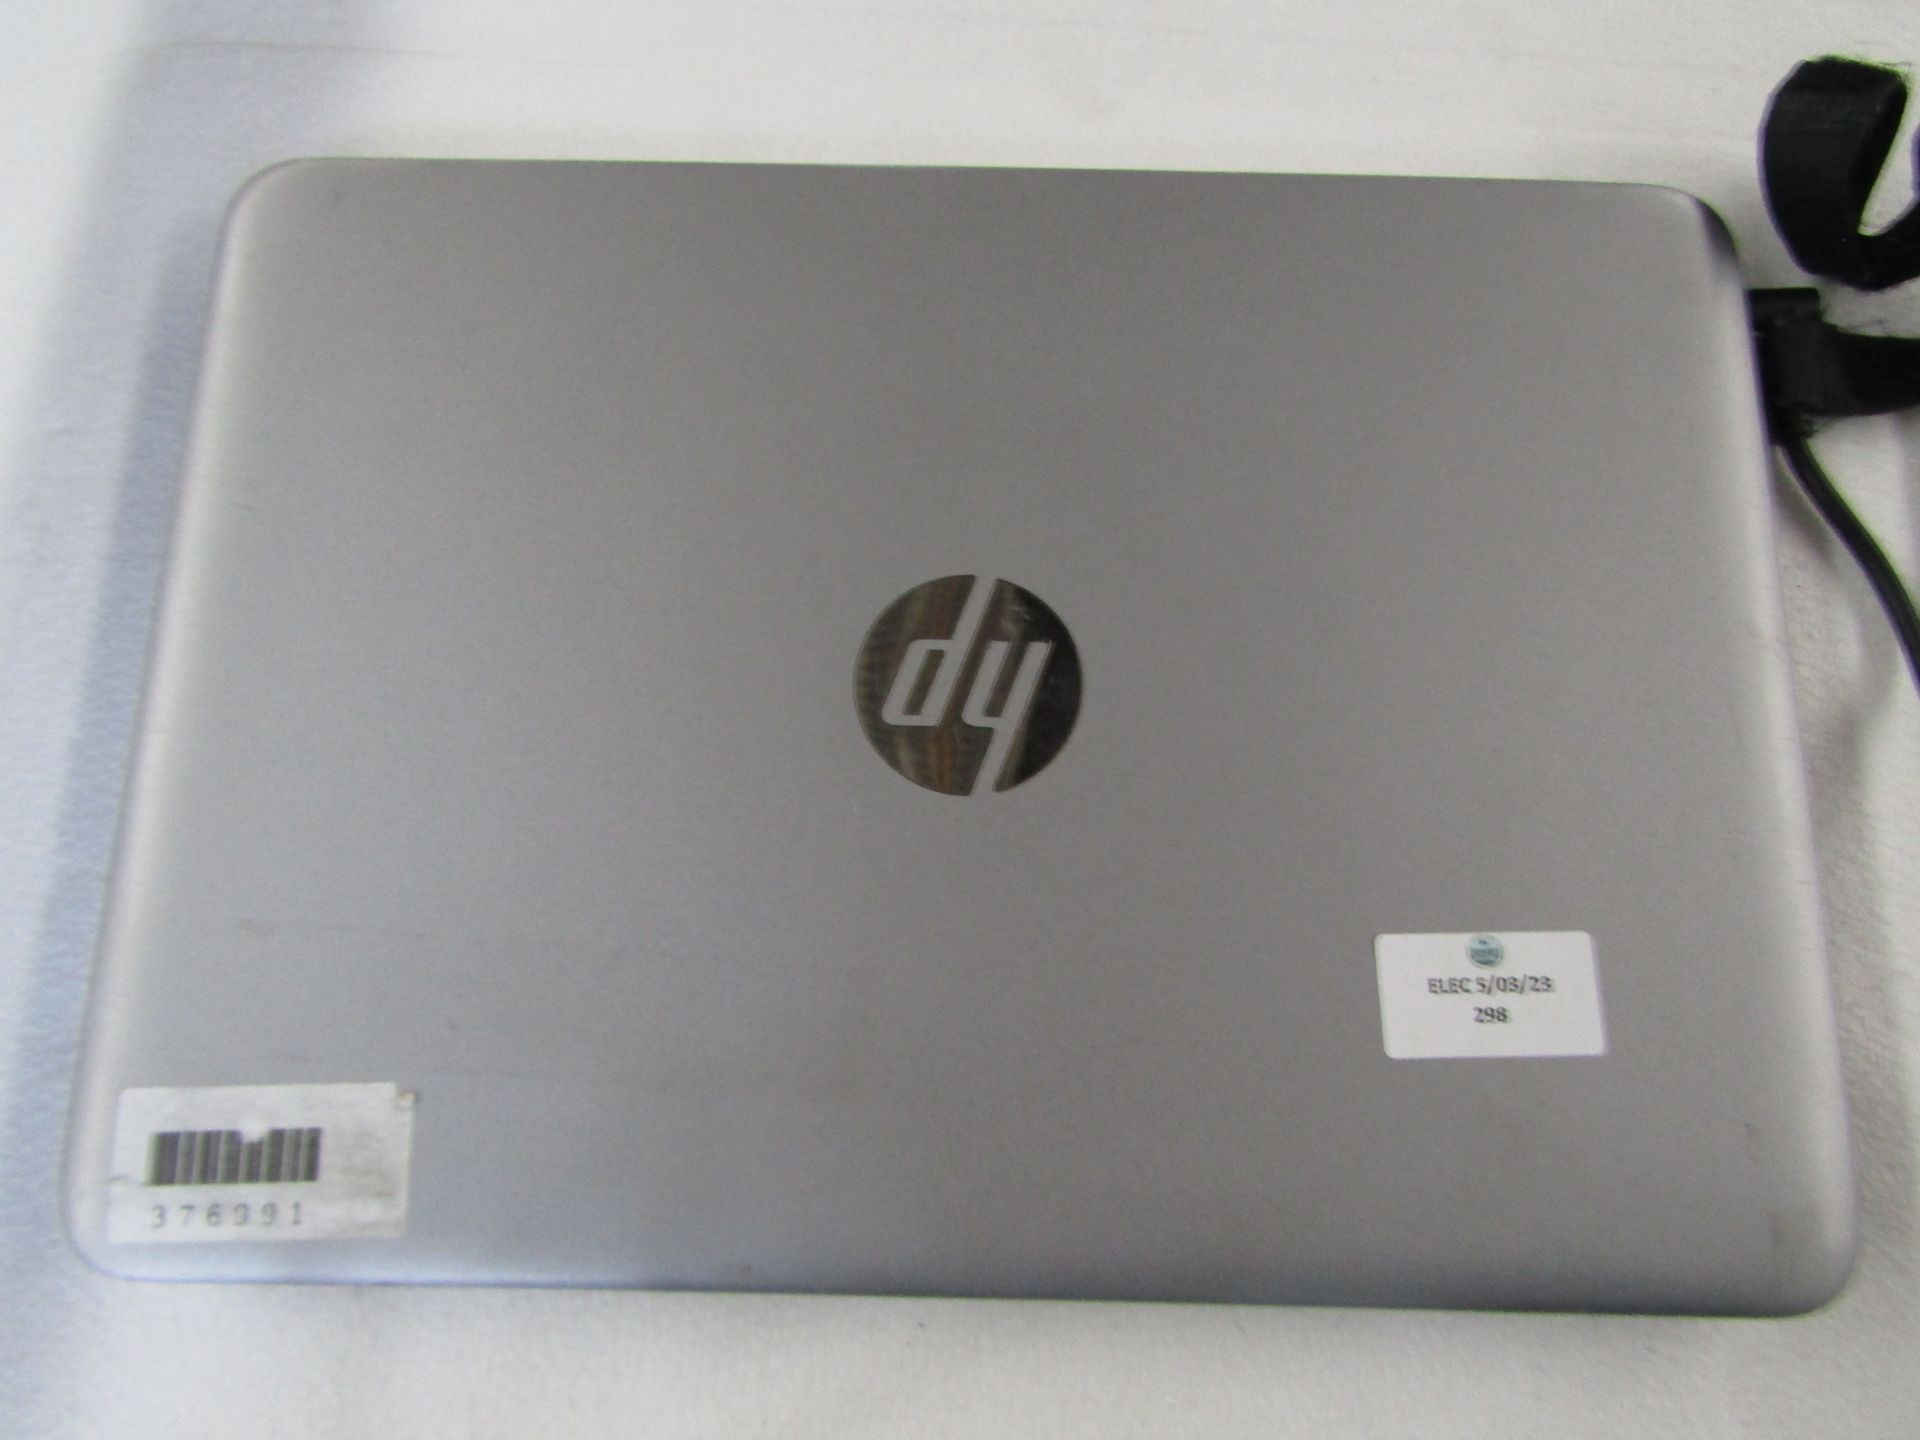 HP Elitebook 820 G3 core i5-6200U processor, 256gb disc and 8Gb ram, powers on and goes through to - Image 2 of 2